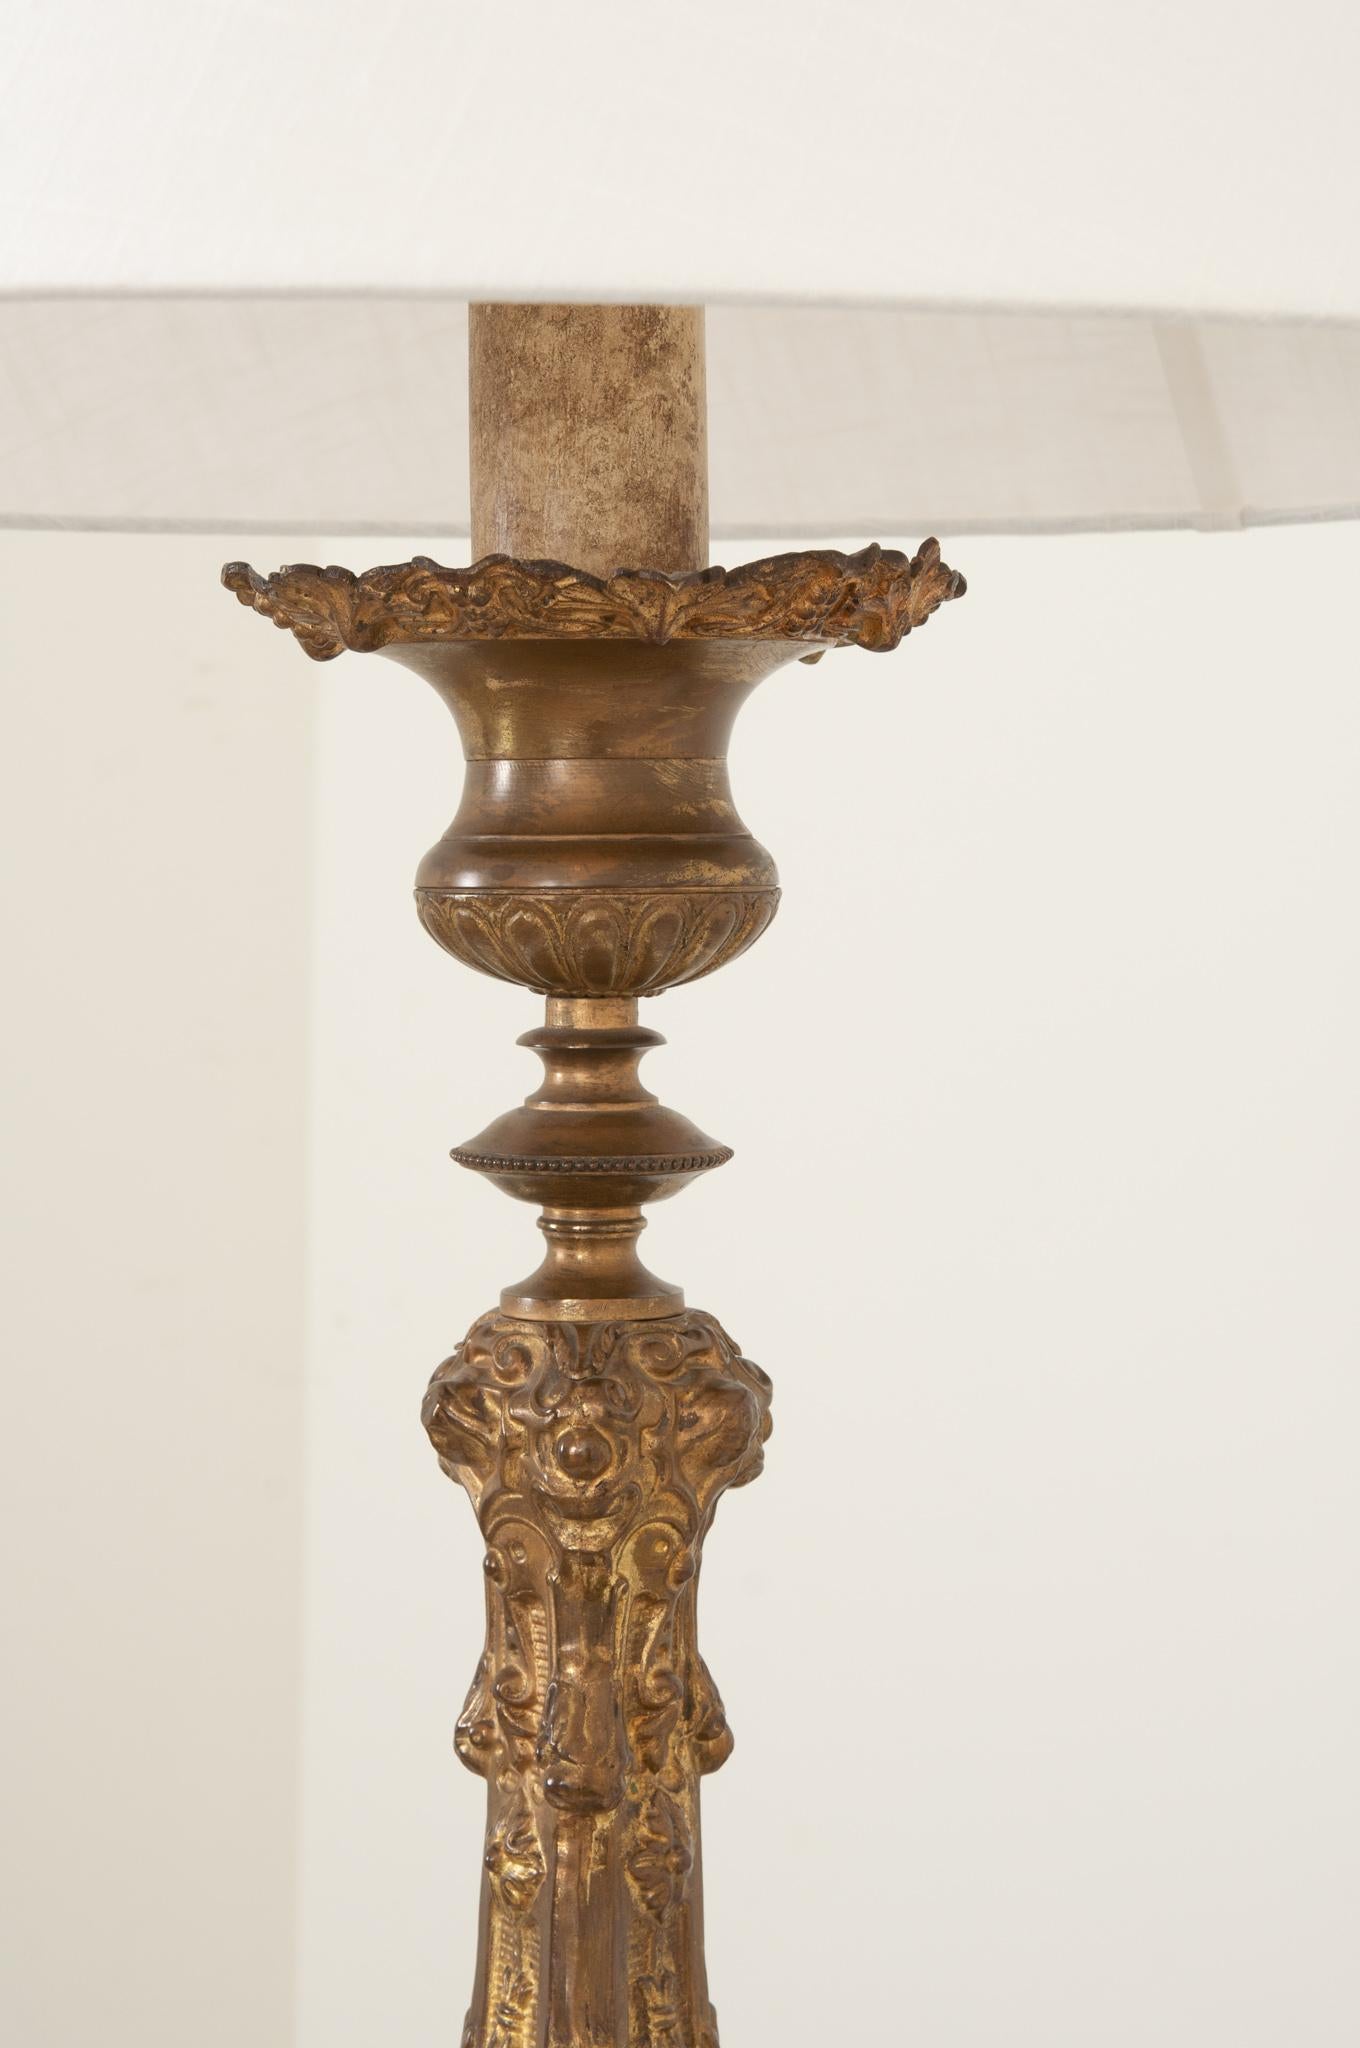 French 19th Century Brass Altar Candlestick Lamp and Shade In Good Condition For Sale In Baton Rouge, LA